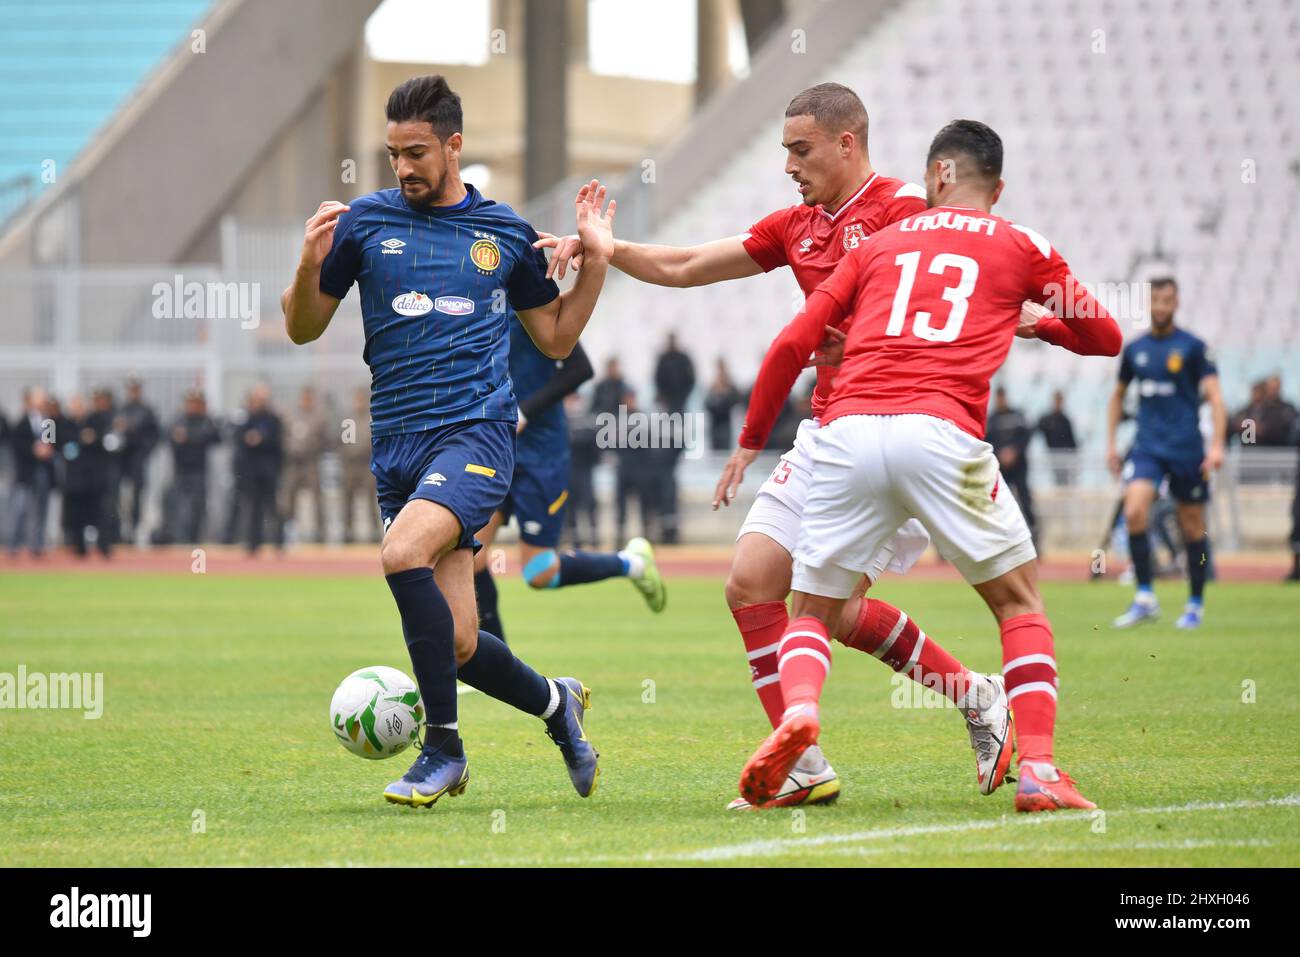 Tunisia. 12th Mar, 2022. Mootaz zaddem and Mohamed ali ben Romdhane in  action during the CAF Champions League 2021 - 22 football match between  Esperance sportive Tunisia and Étoile Sportive du Sahel